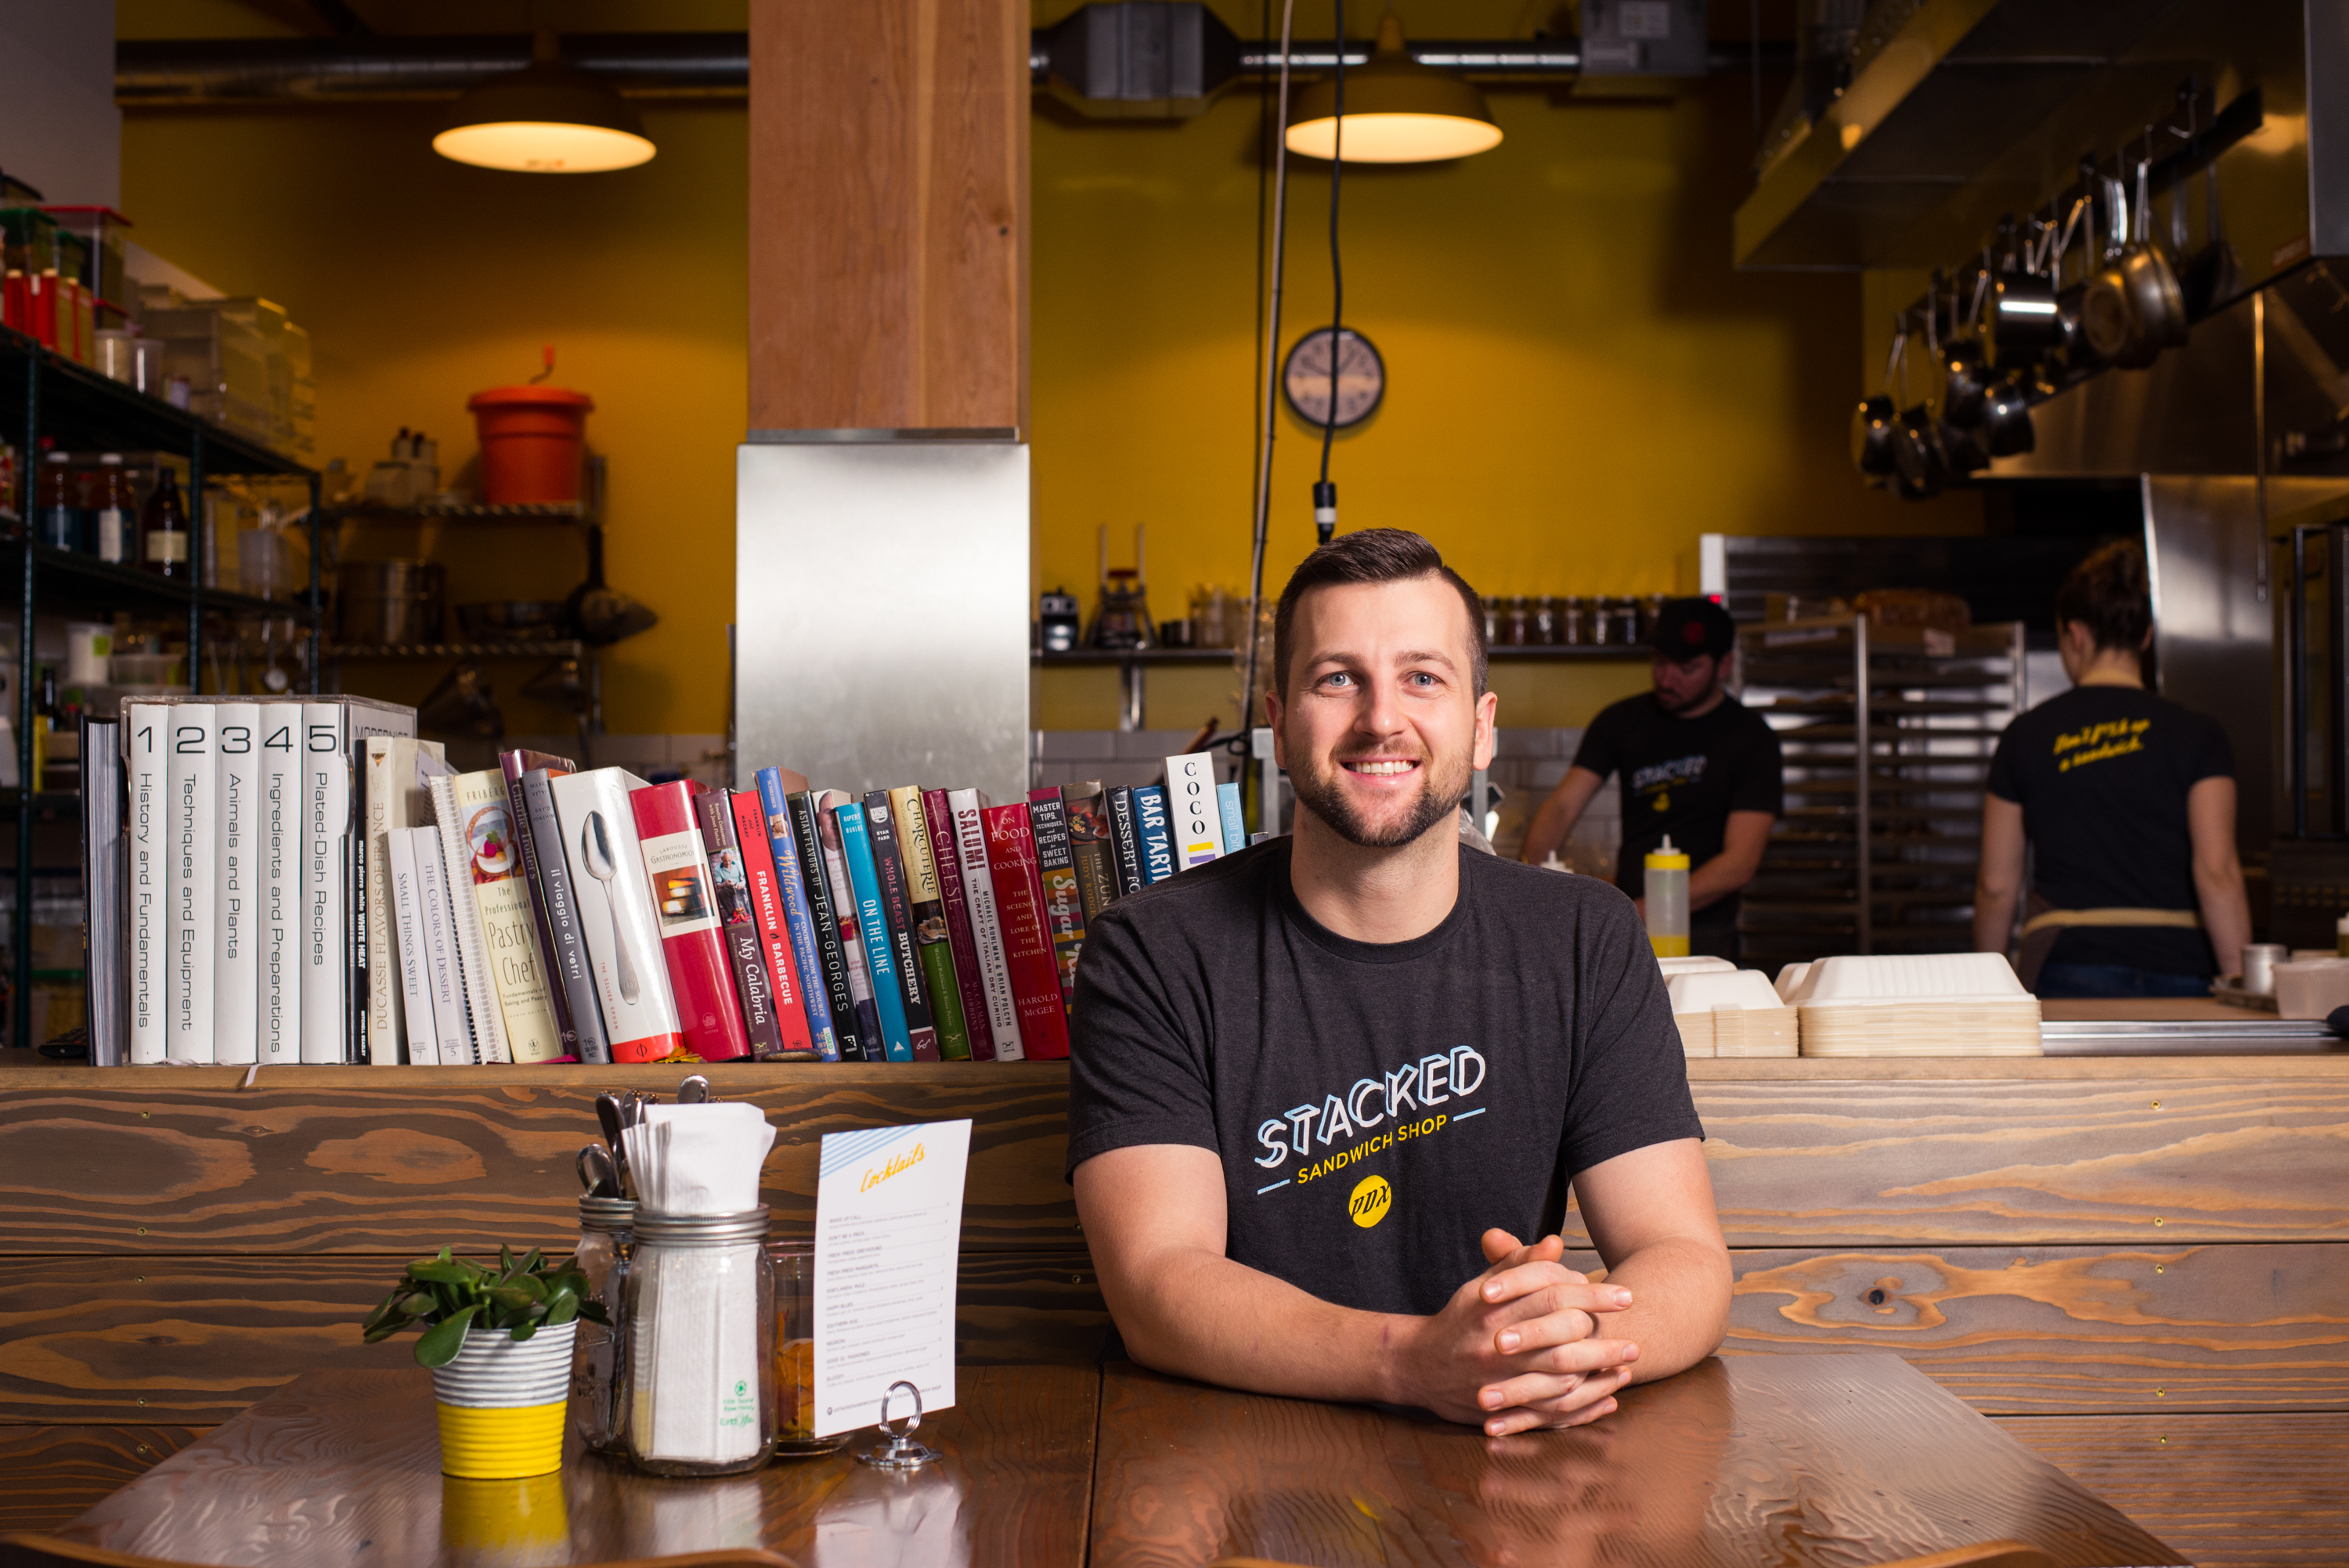 Top Chef alumnus Gabriel Pascuzzi sits at the counter of the now-closed location of Stacked Sandwich Shop.